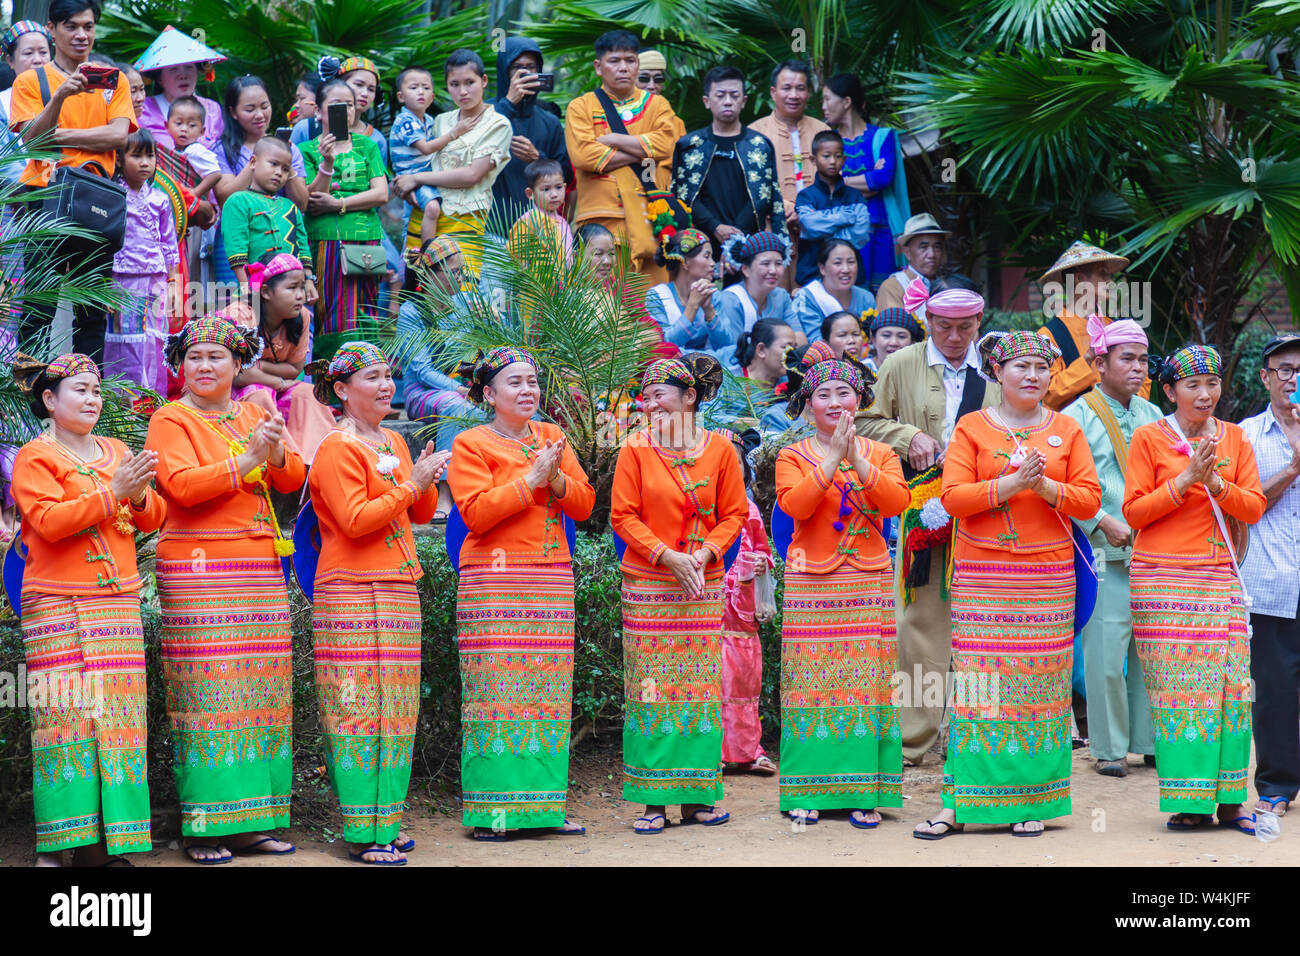 Group of Shan or Tai Yai (ethnic group living in parts of Myanmar and Thailand) in tribal dress do native dancing in Shan New Year celebrations Stock Photo